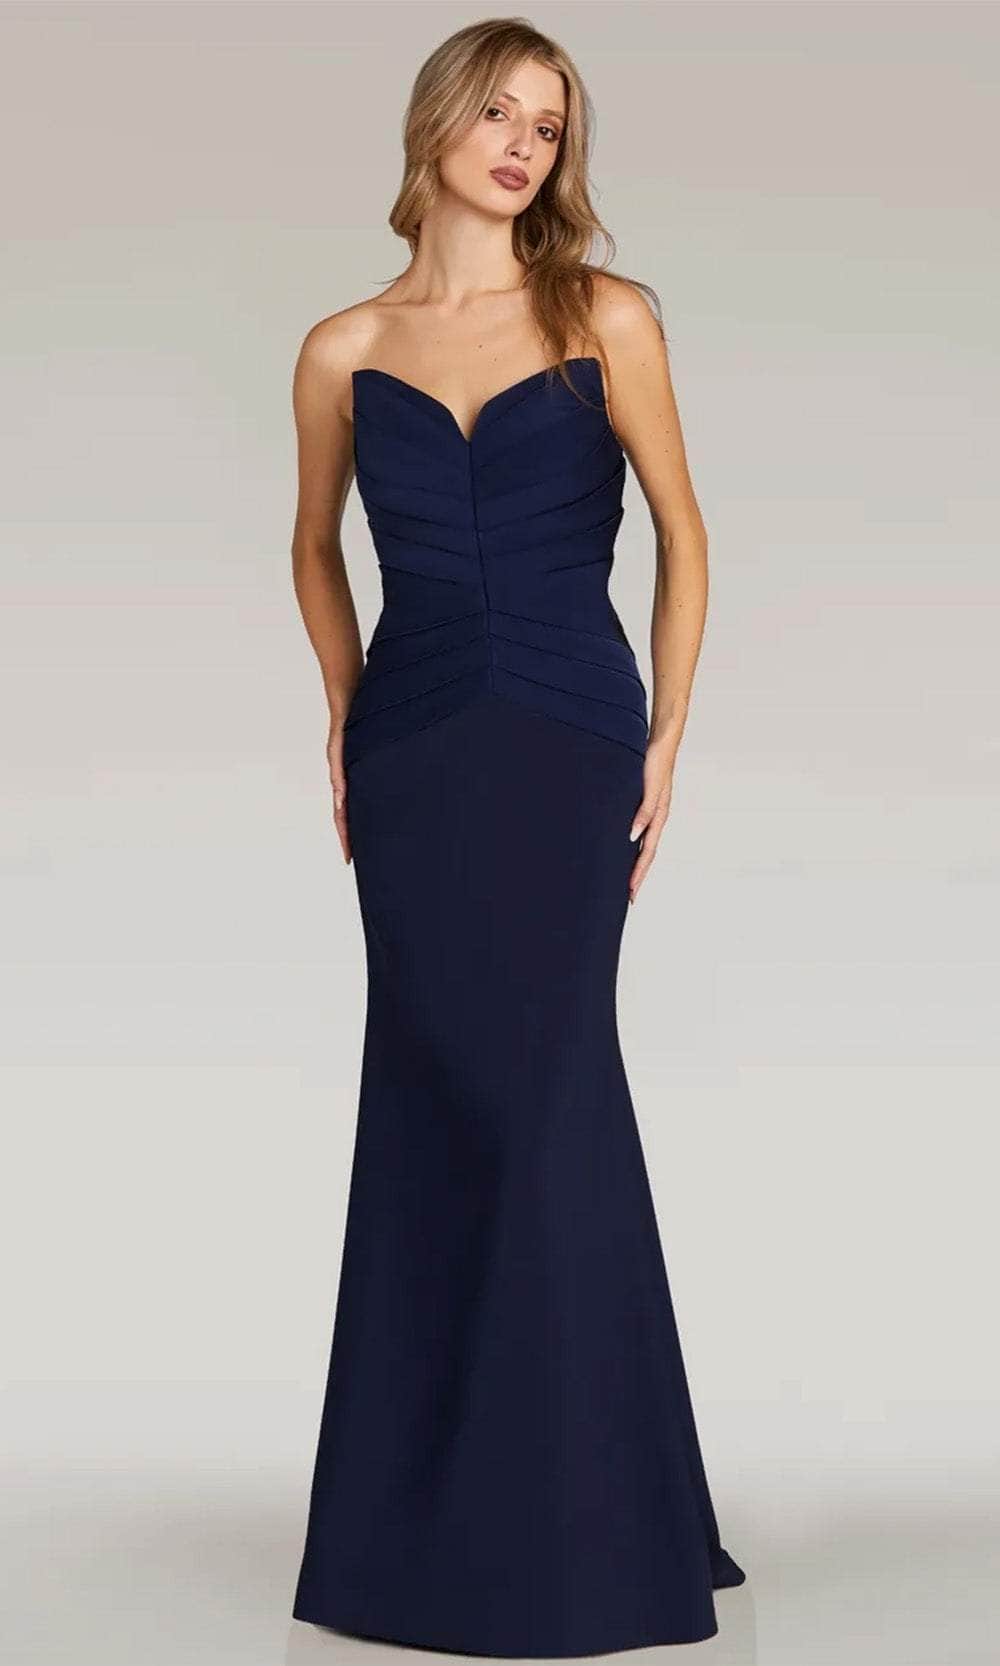 Gia Franco 12312 - Ruched Mermaid Evening Dress
